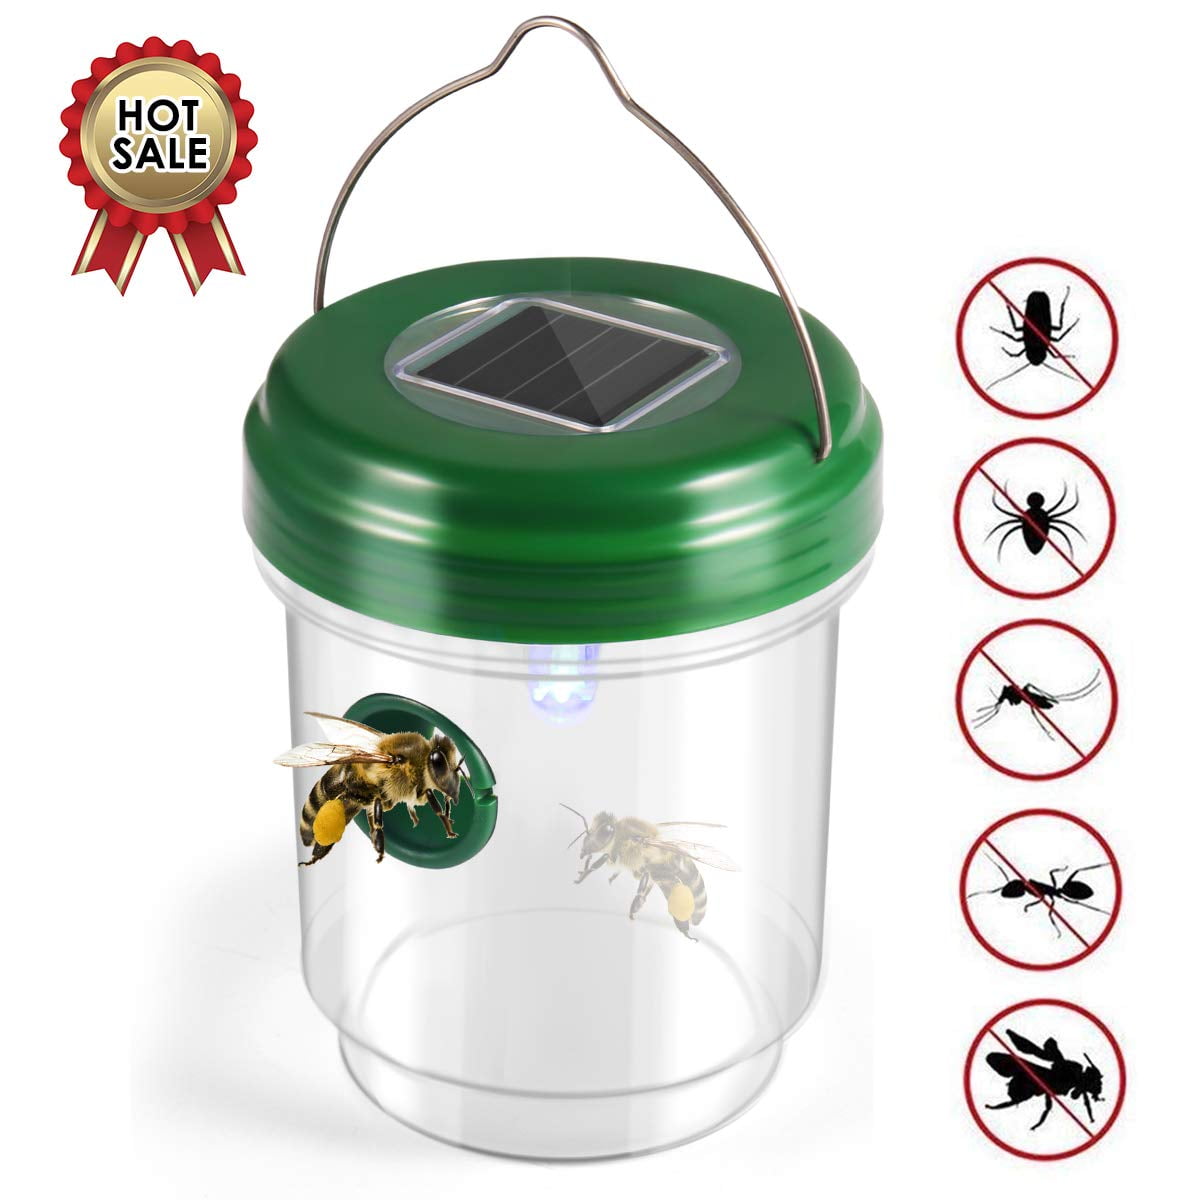 Houkiper Solar Powered Wasp Trap Insect Catcher for Bees Yellow Jackets Hornets 